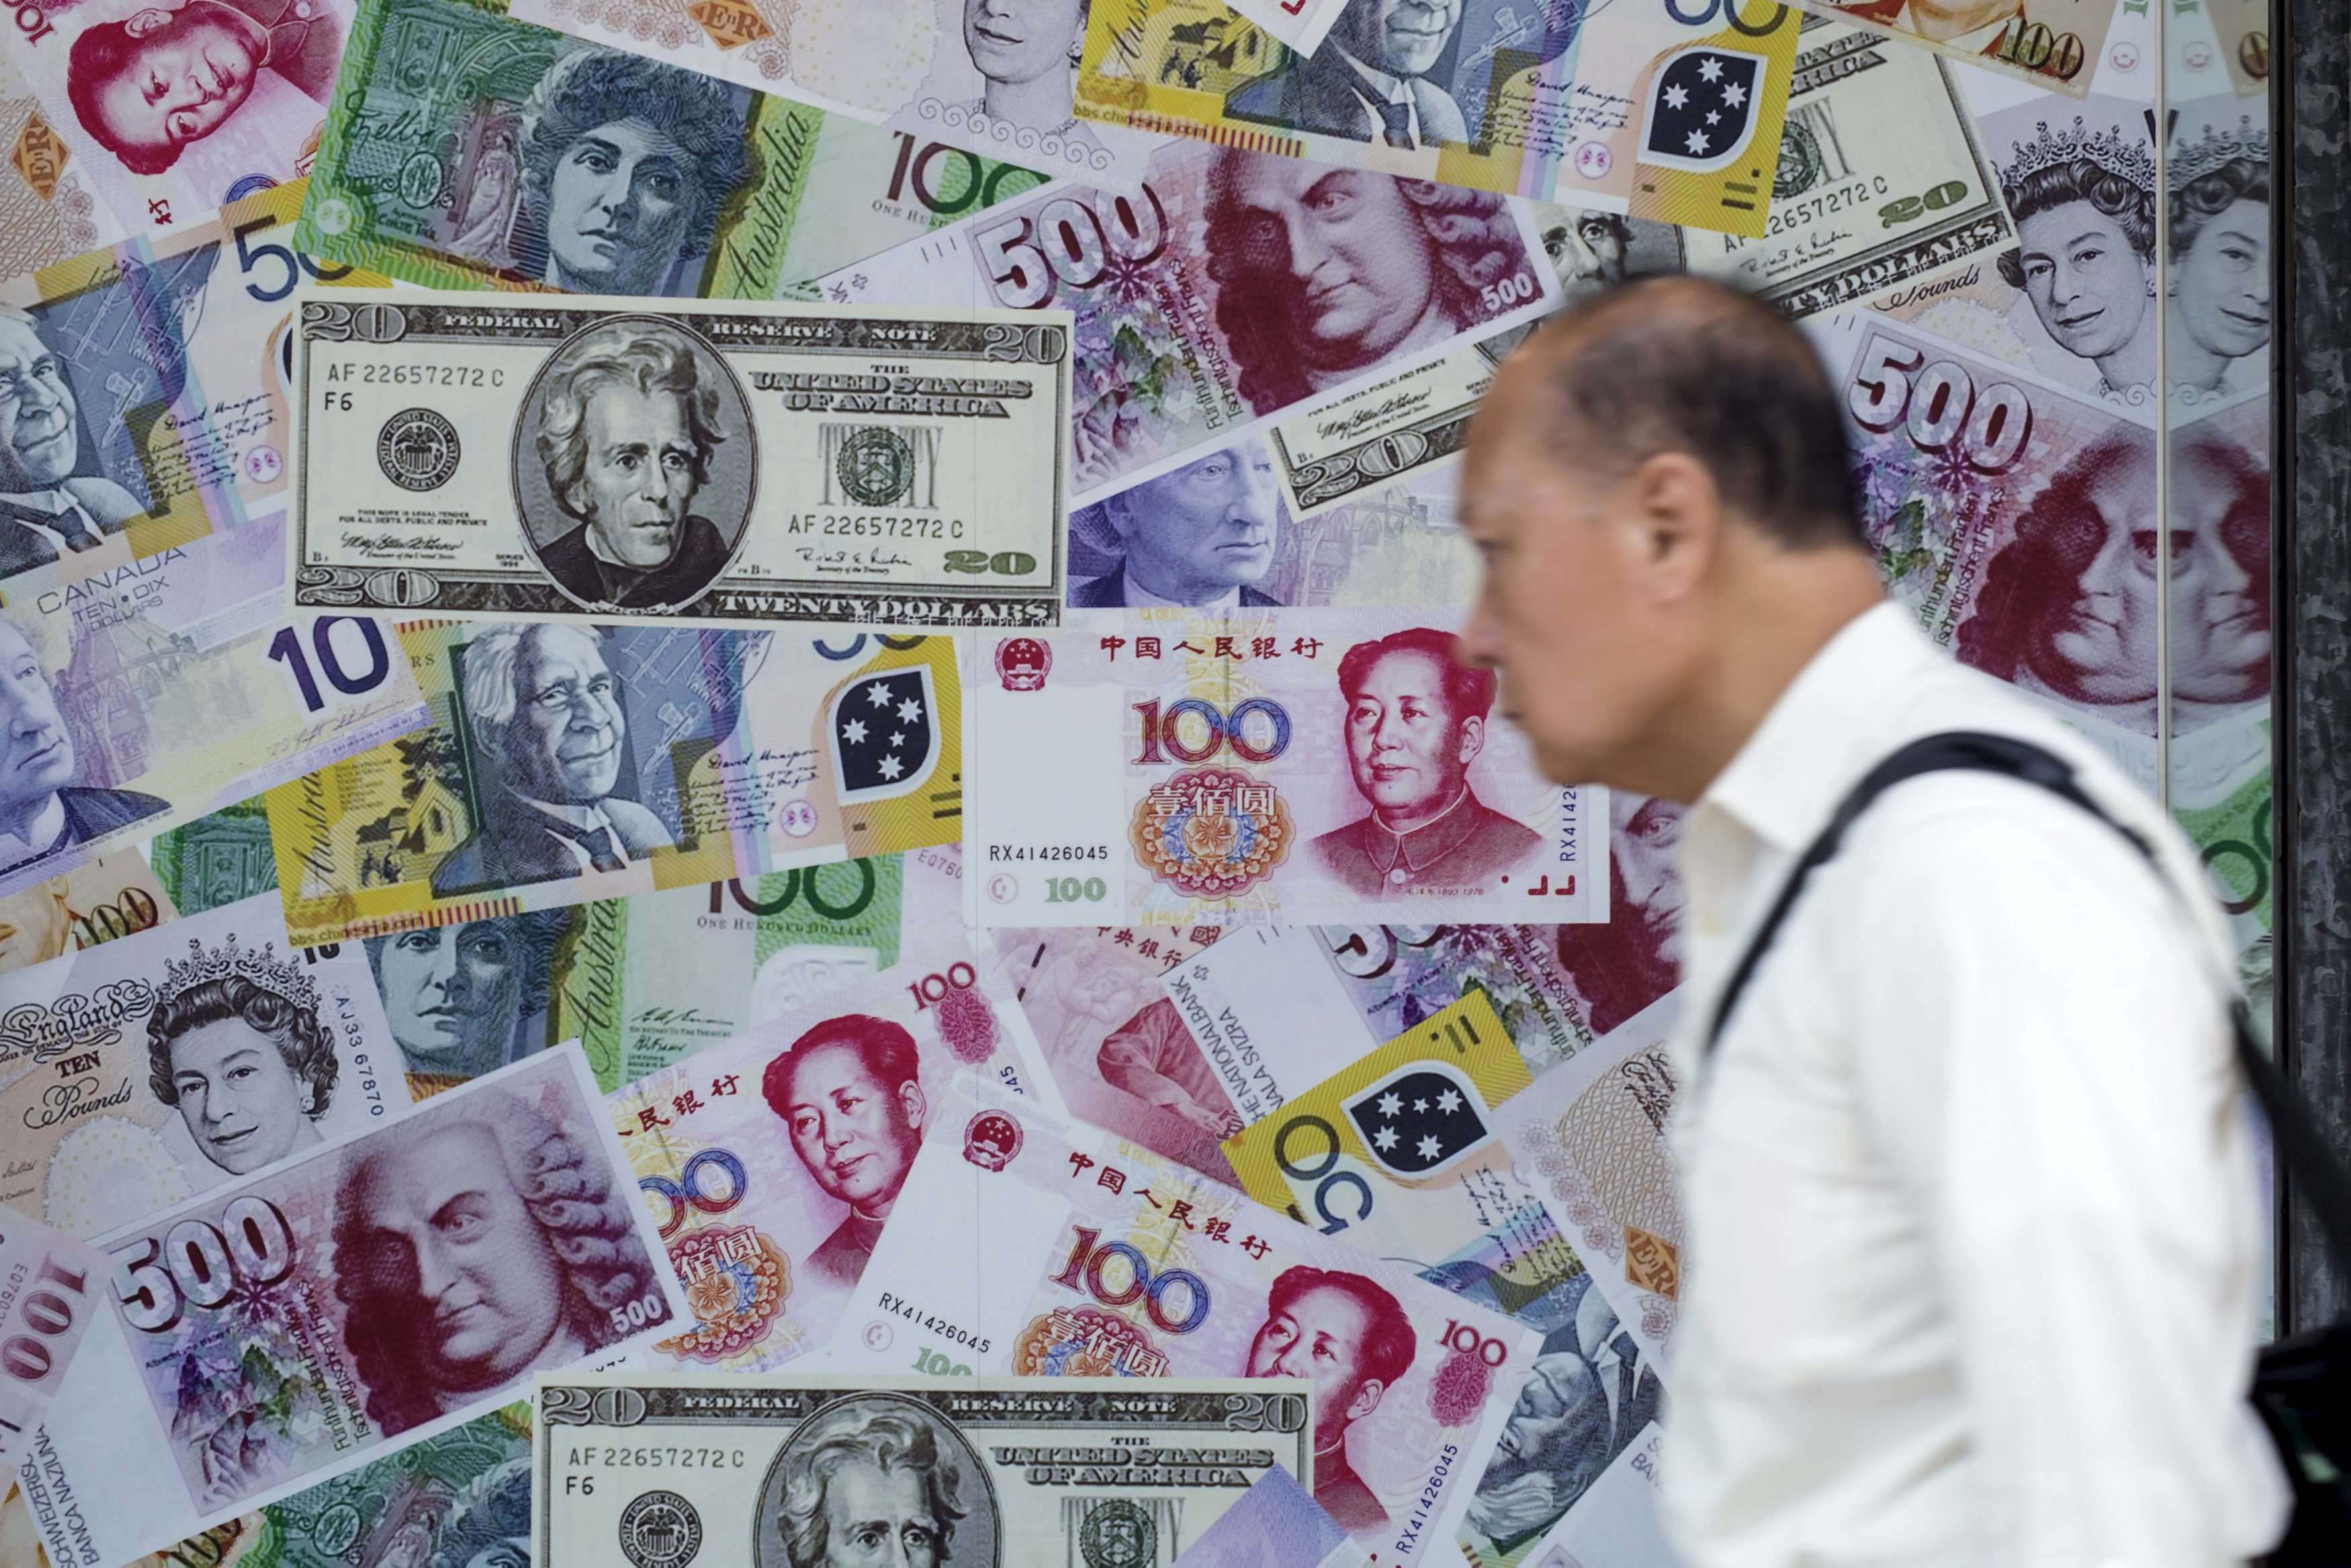 A man walks past an advertisement promoting renminbi or yuan, US dollar and Euro exchange services in Hong Kong. Photo: Reuters